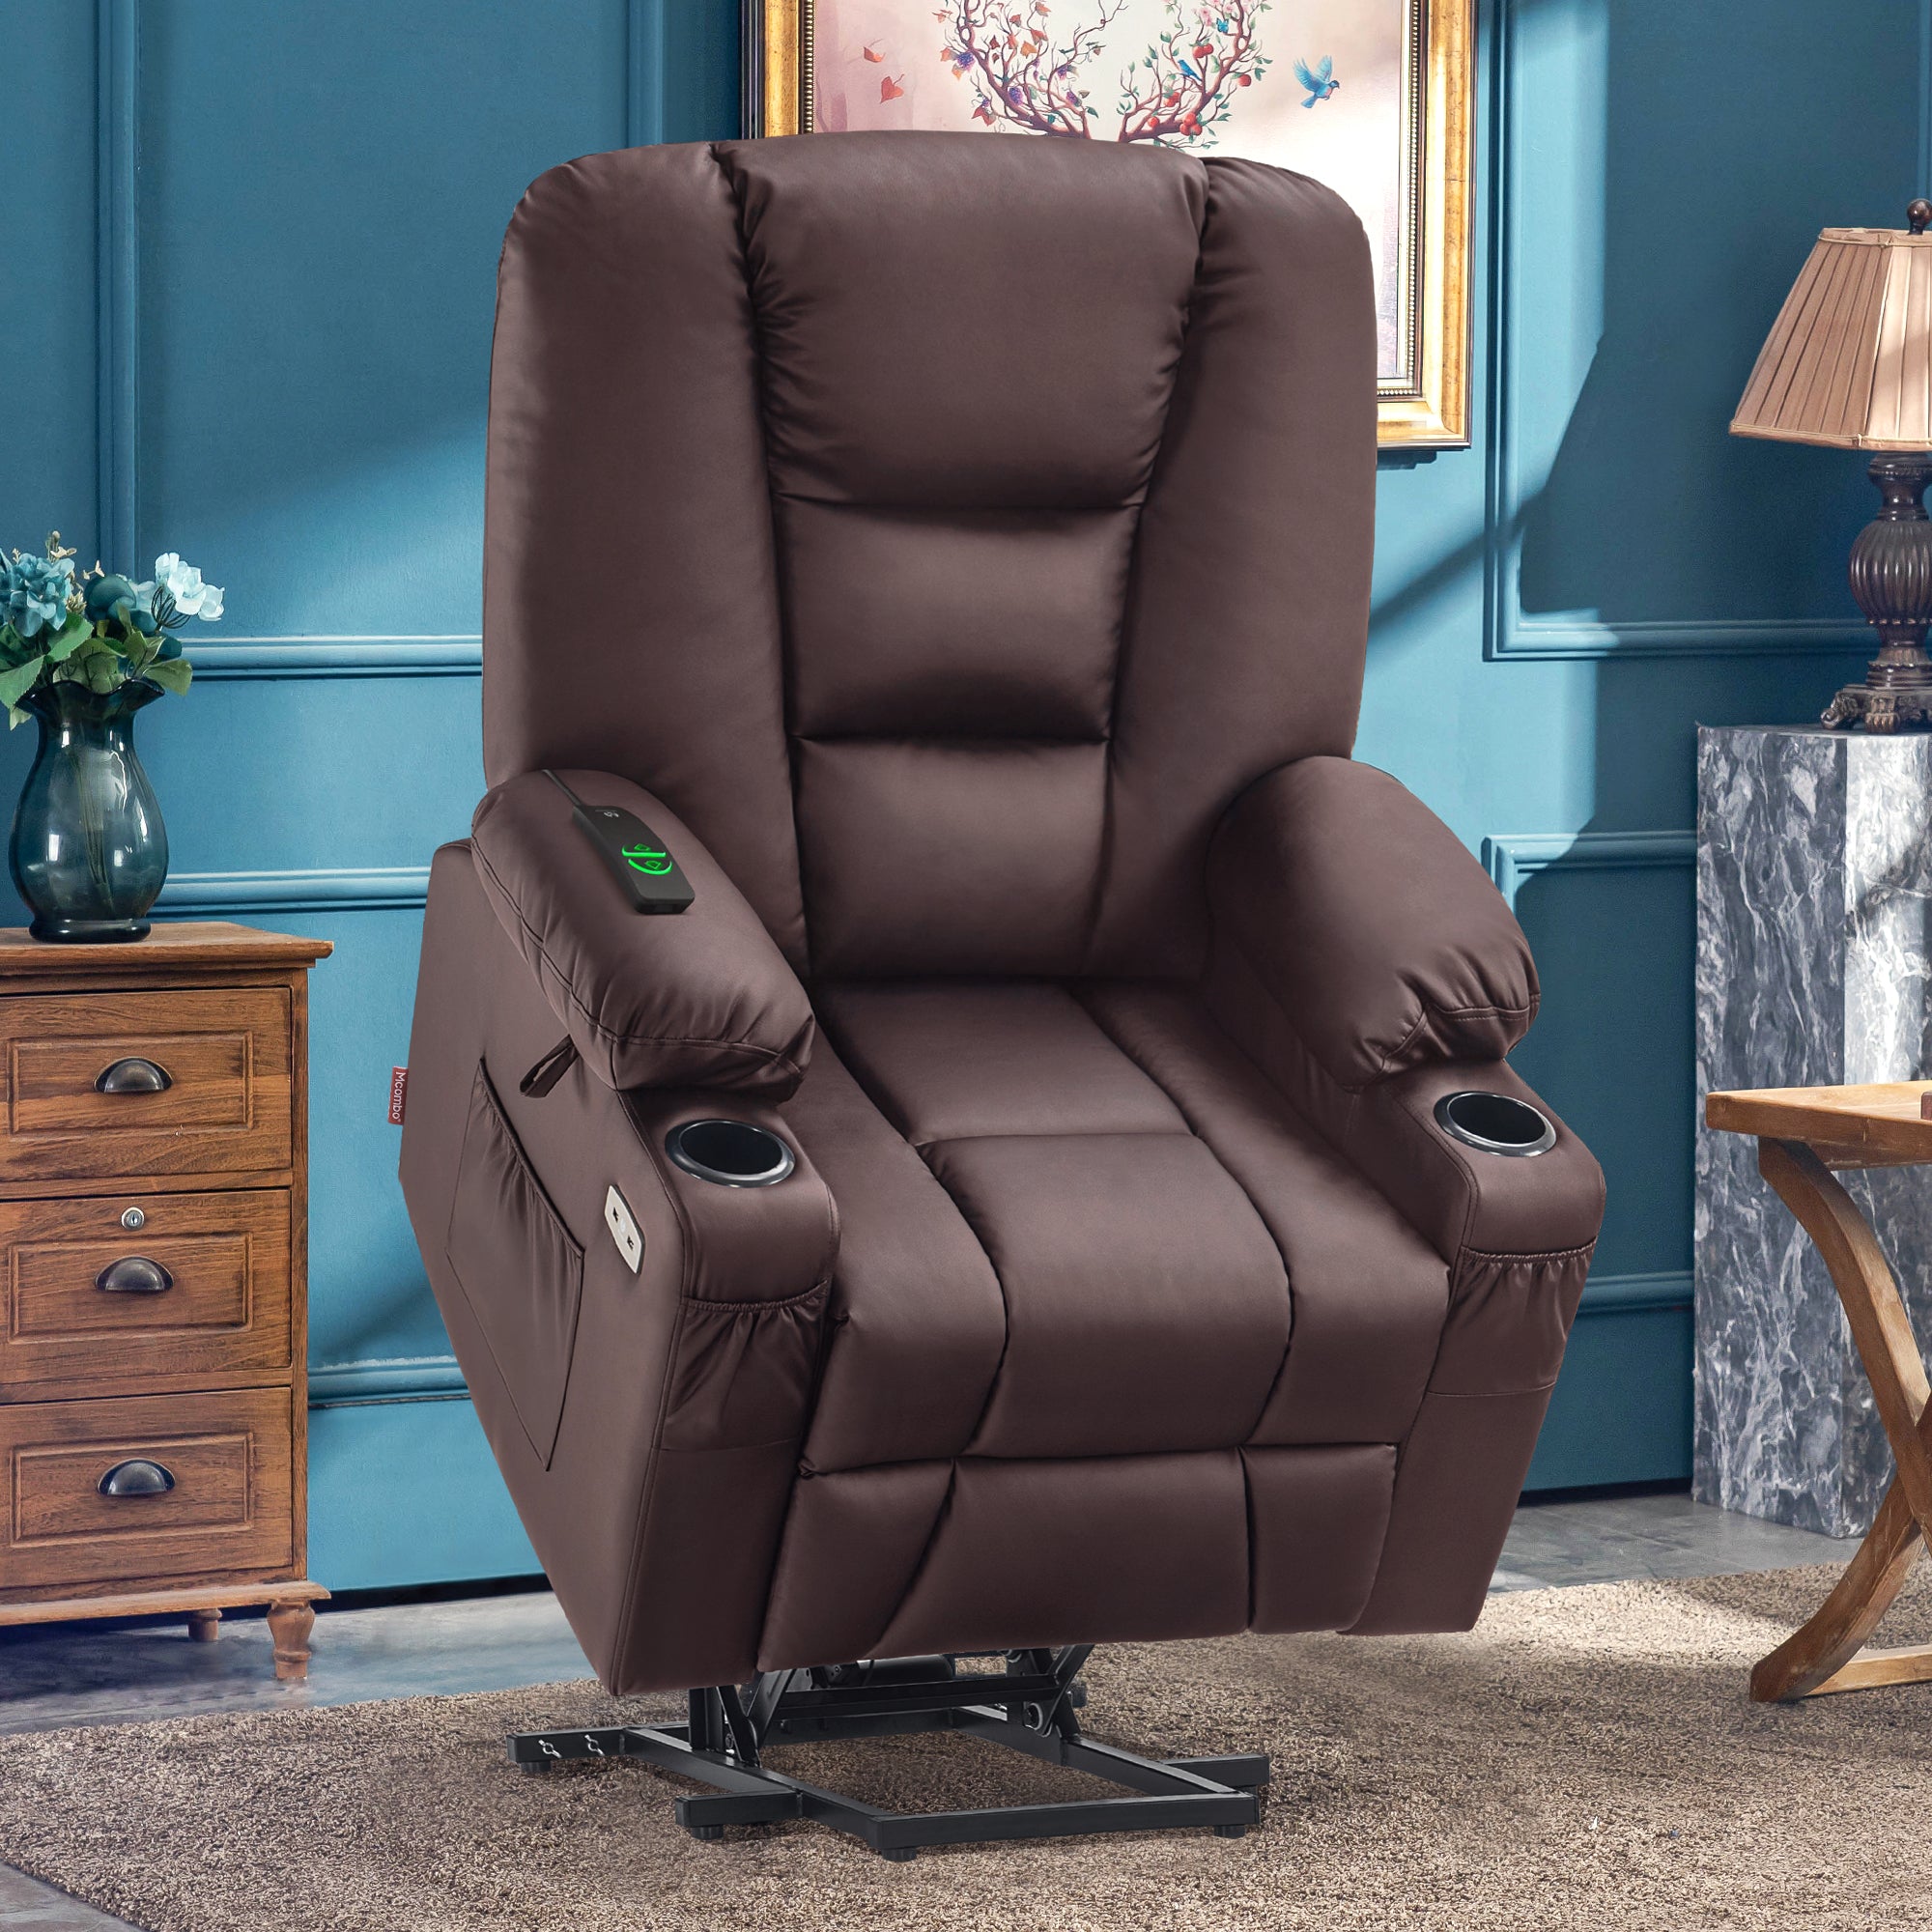 MCombo Power Lift Recliner Chair with Massage and Heat for Elderly, Extended Footrest, 3 Positions, Cup Holders, USB Ports, Faux Leather 7519 Series